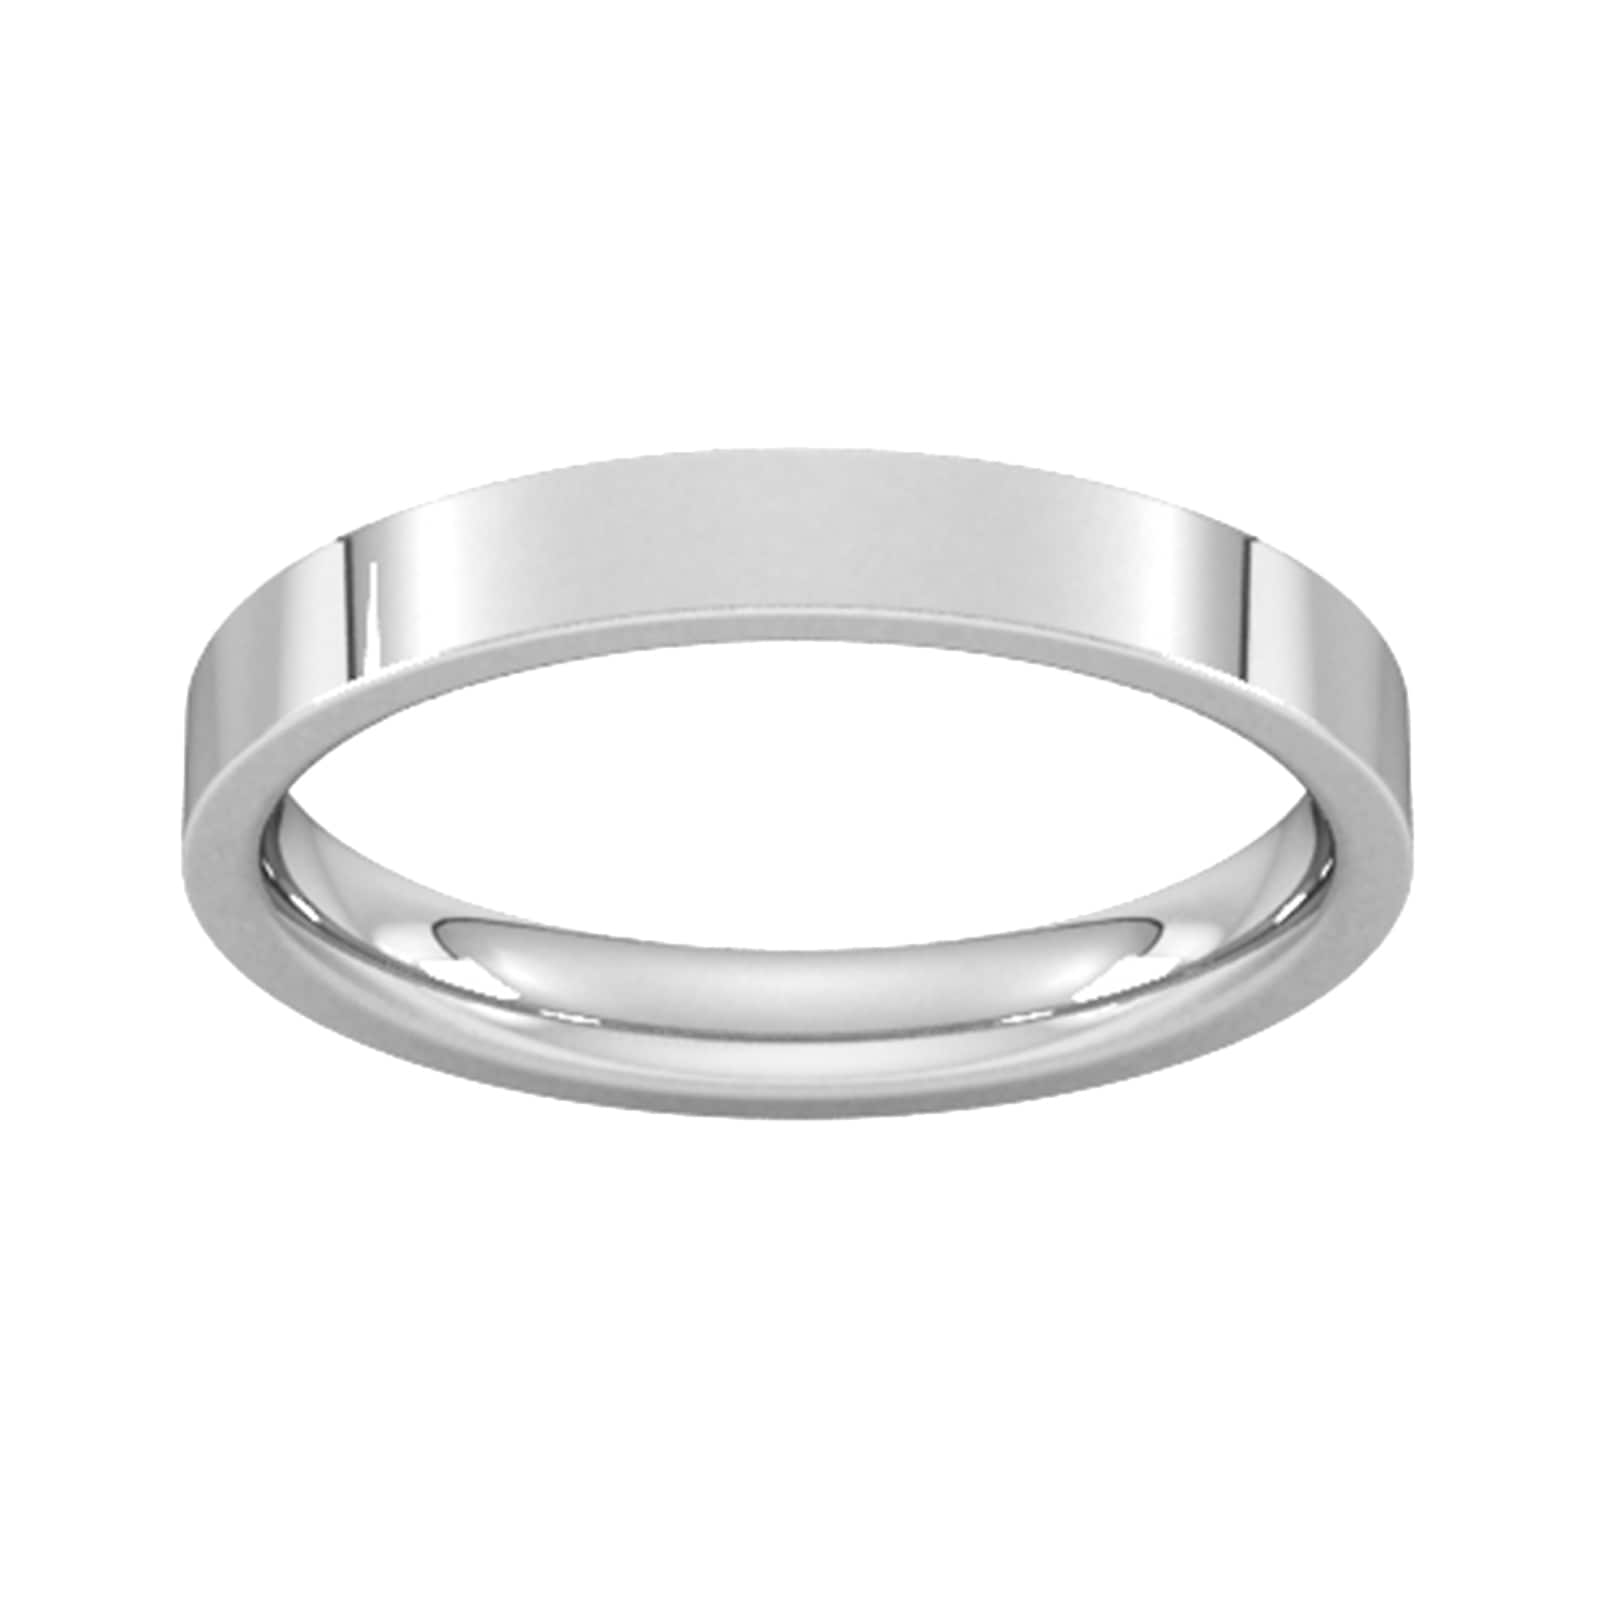 3mm Flat Court Heavy Wedding Ring In 9 Carat White Gold - Ring Size K